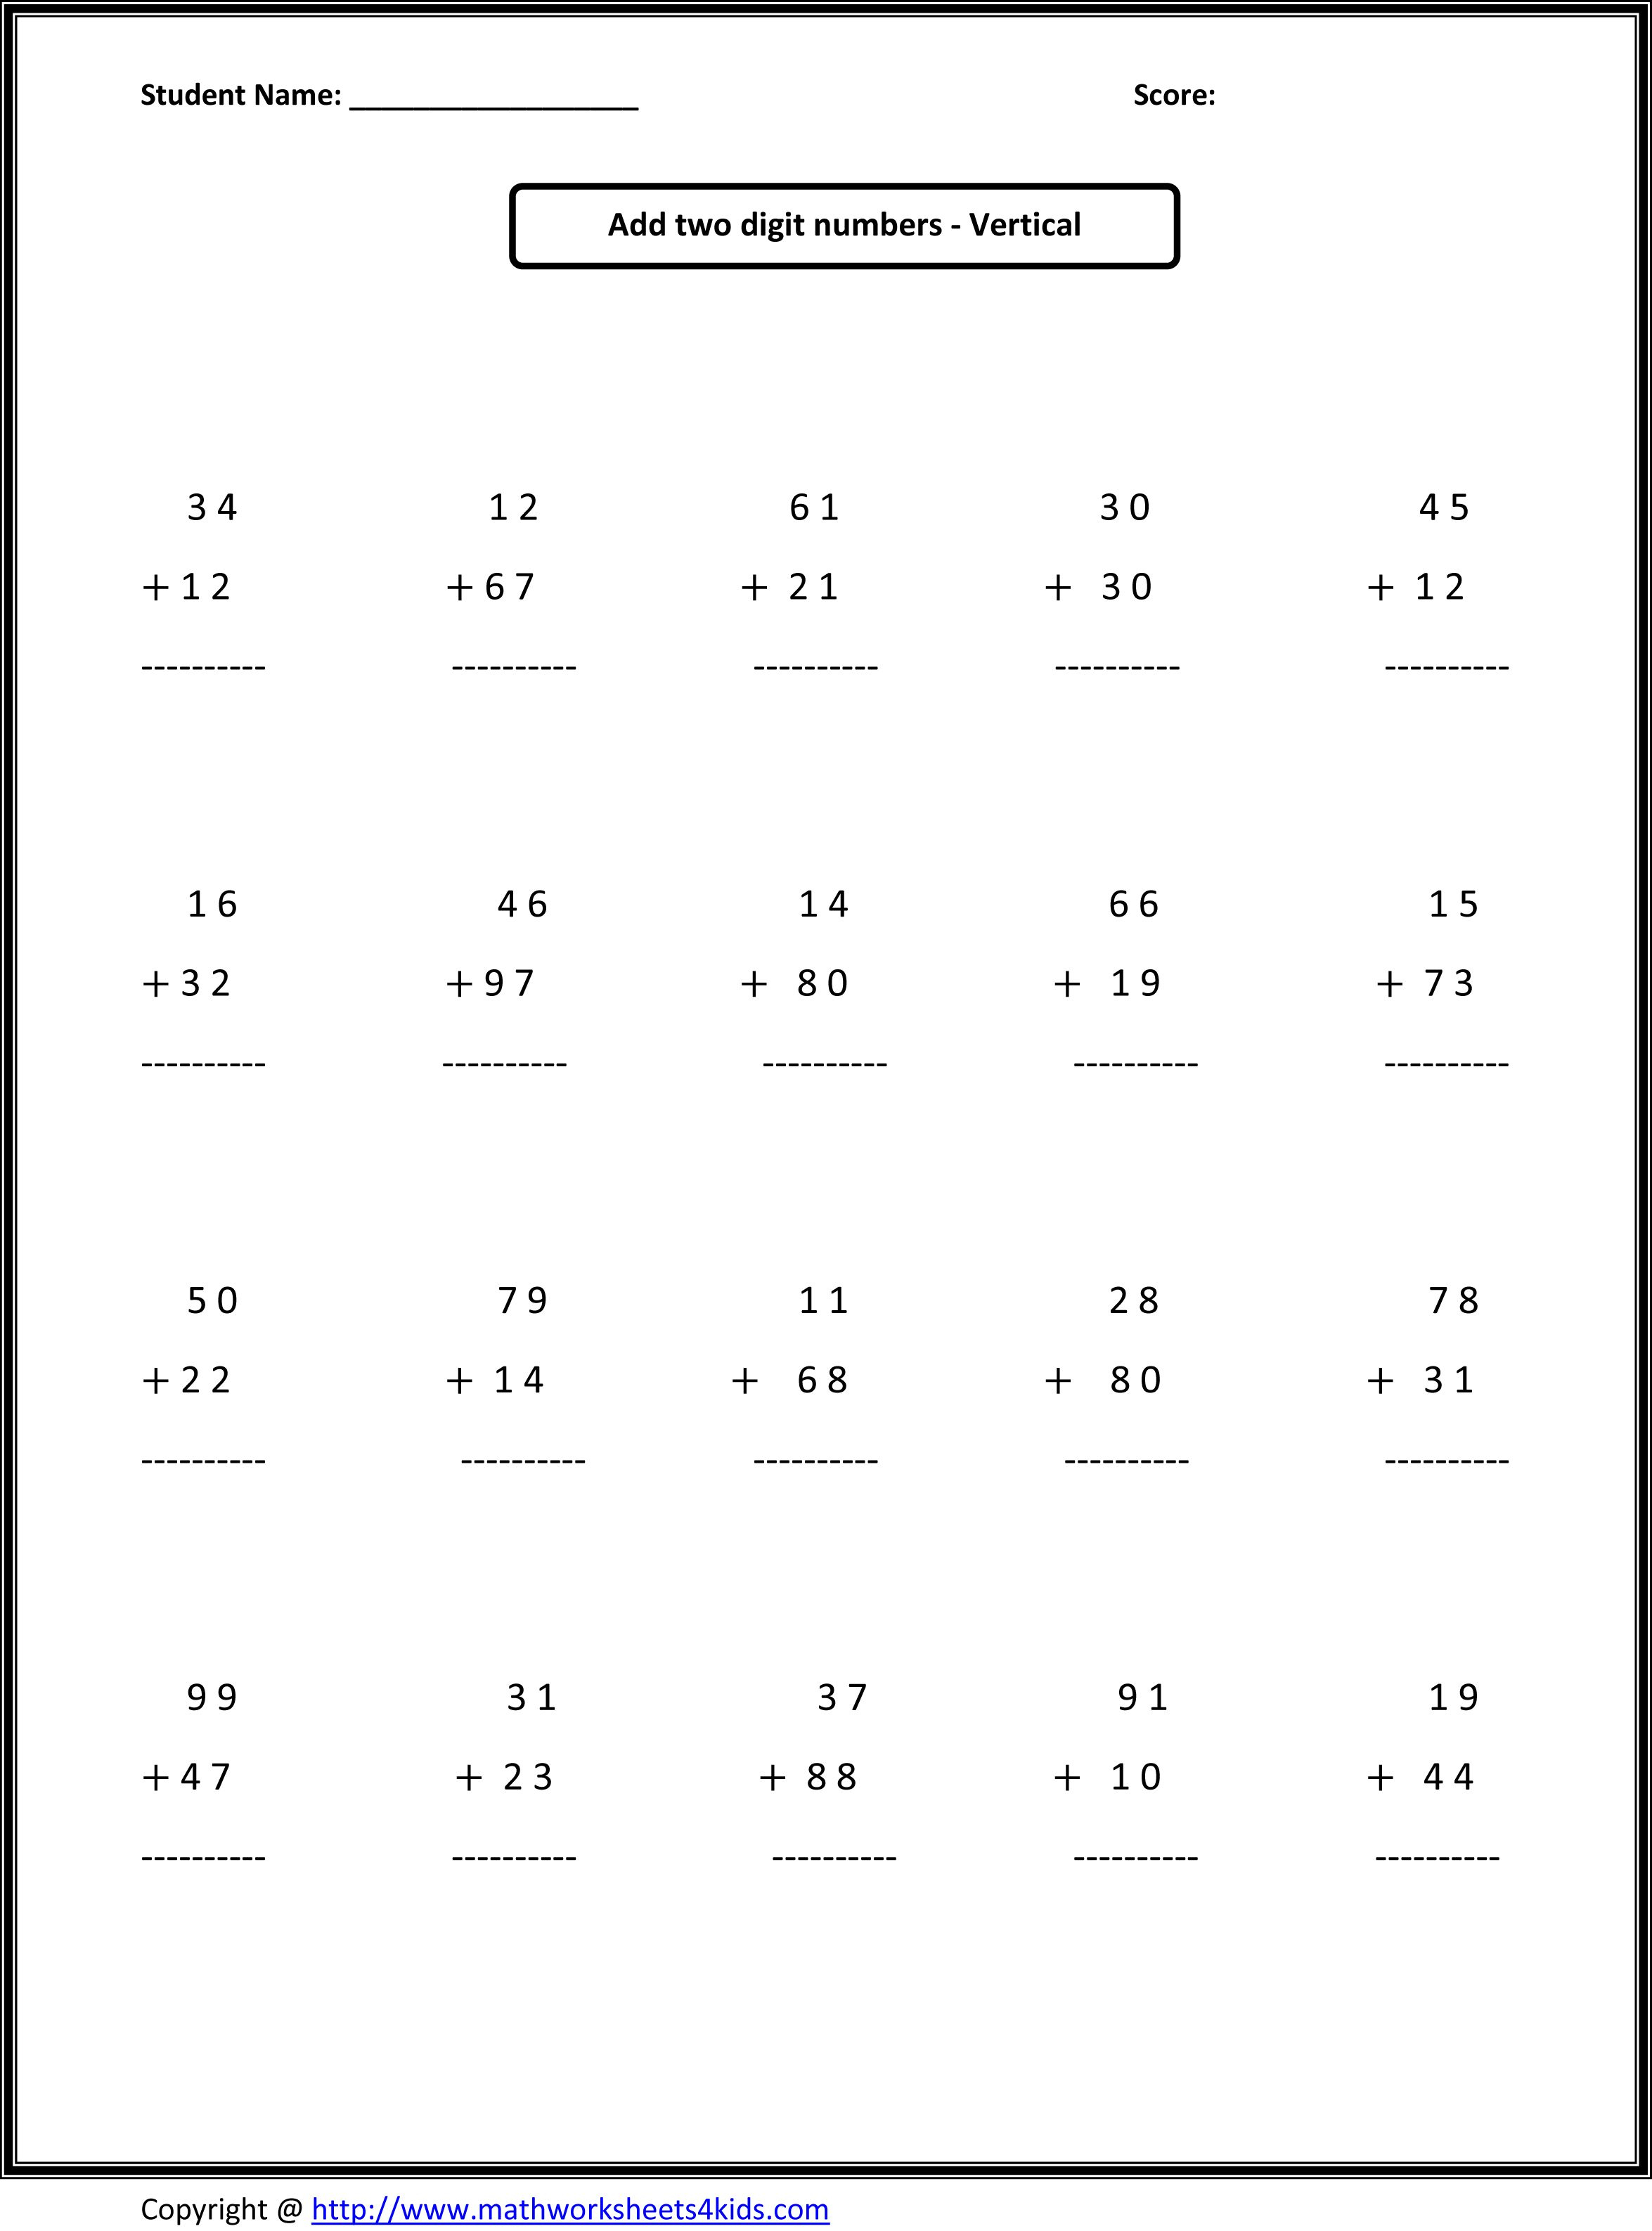 Math Worksheets For 2Nd Graders | Go To Top Place Value Worksheets - Free Printable Activity Sheets For 2Nd Grade